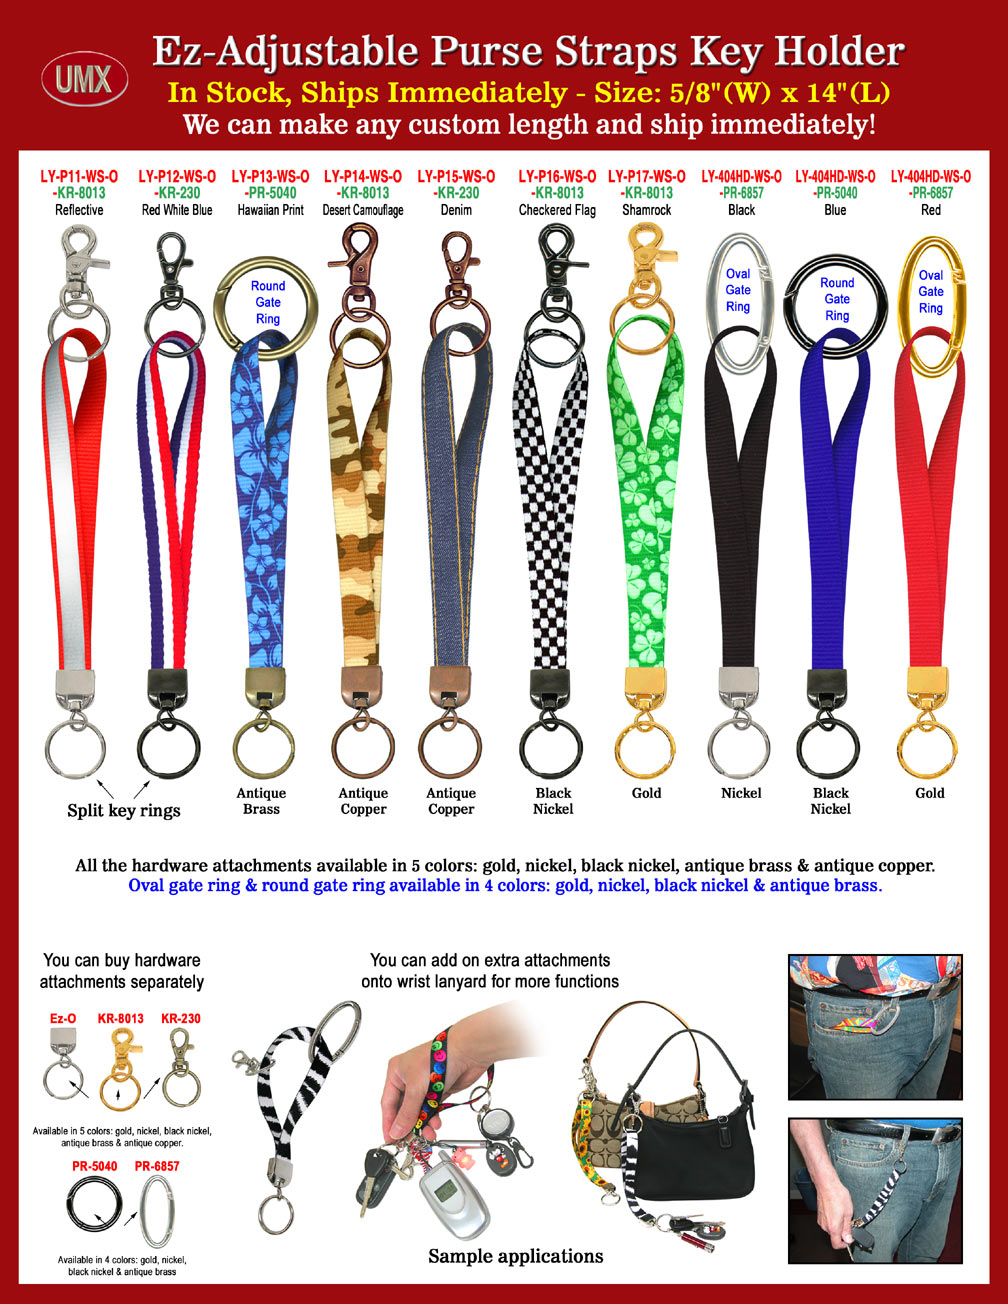 Key Holder Wrist Lanyards With Pre-Printed Sunflower, Reflective, Red-White-Blue Stripes, Hawaiian, Desert Camo and Denim Patterns